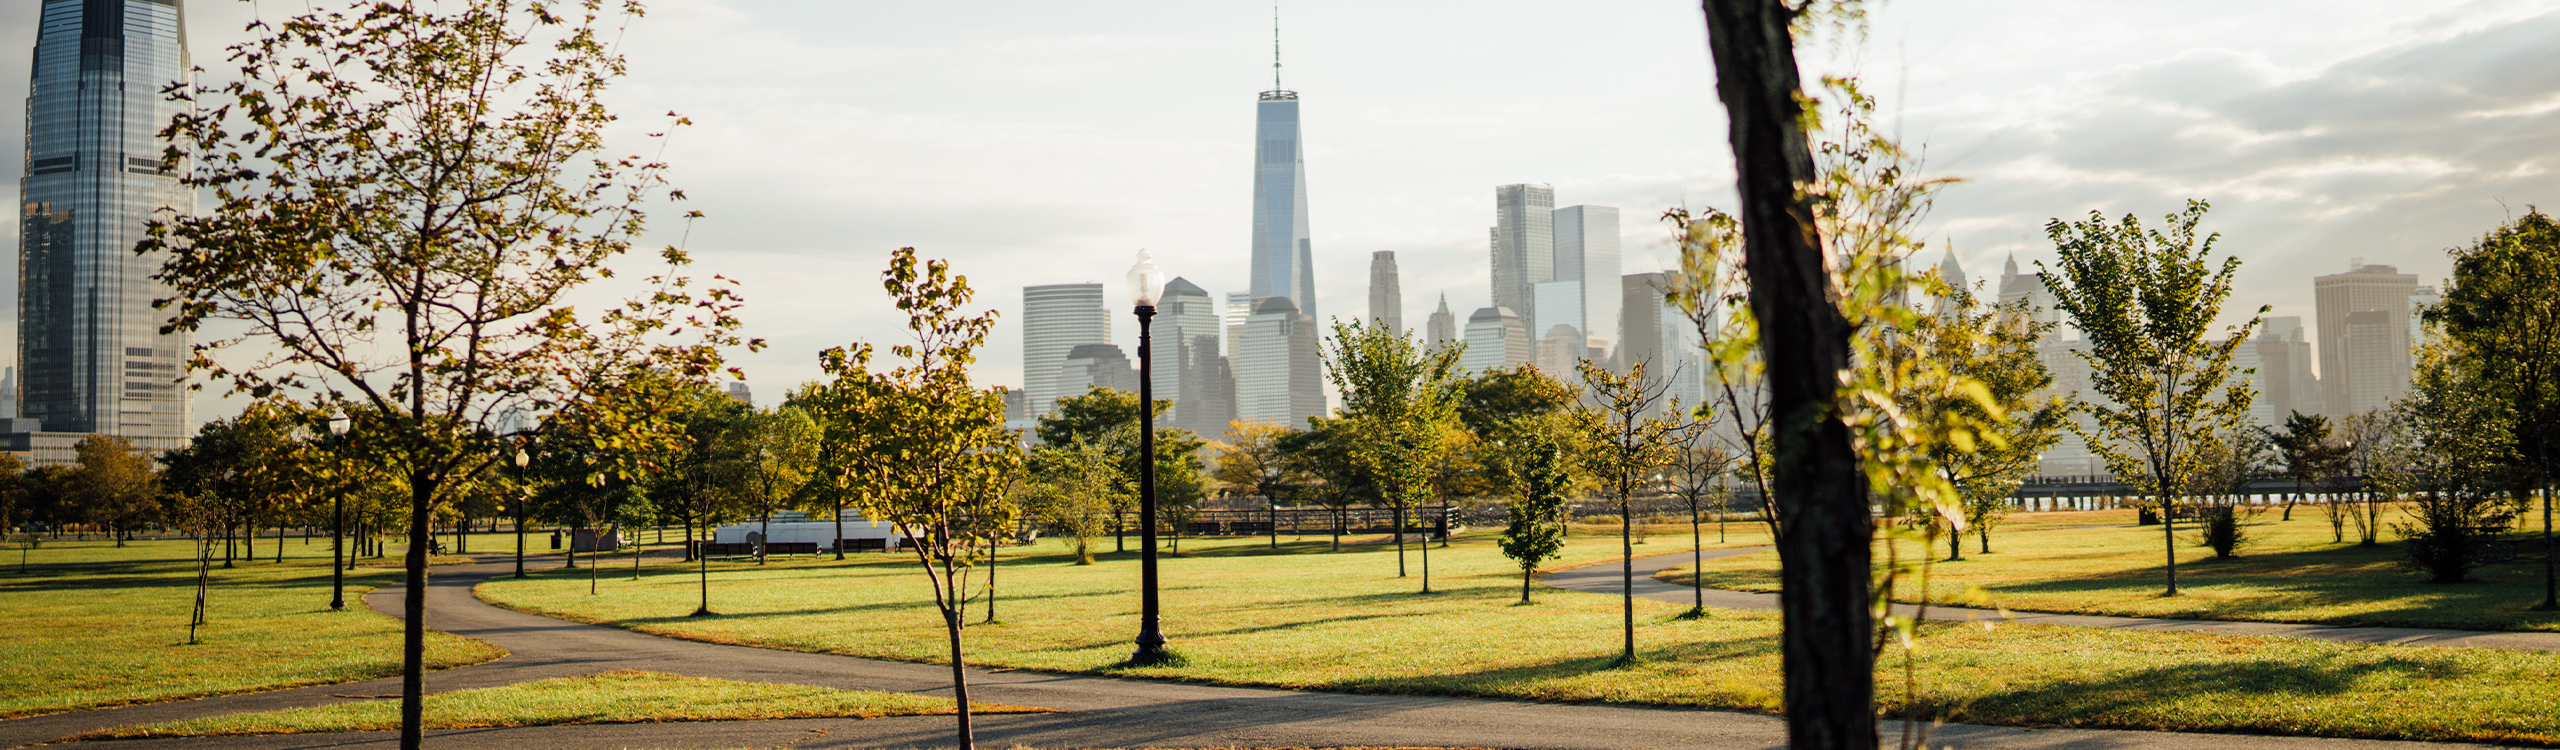 Open House: Liberty State Park South Master Plan - May 11